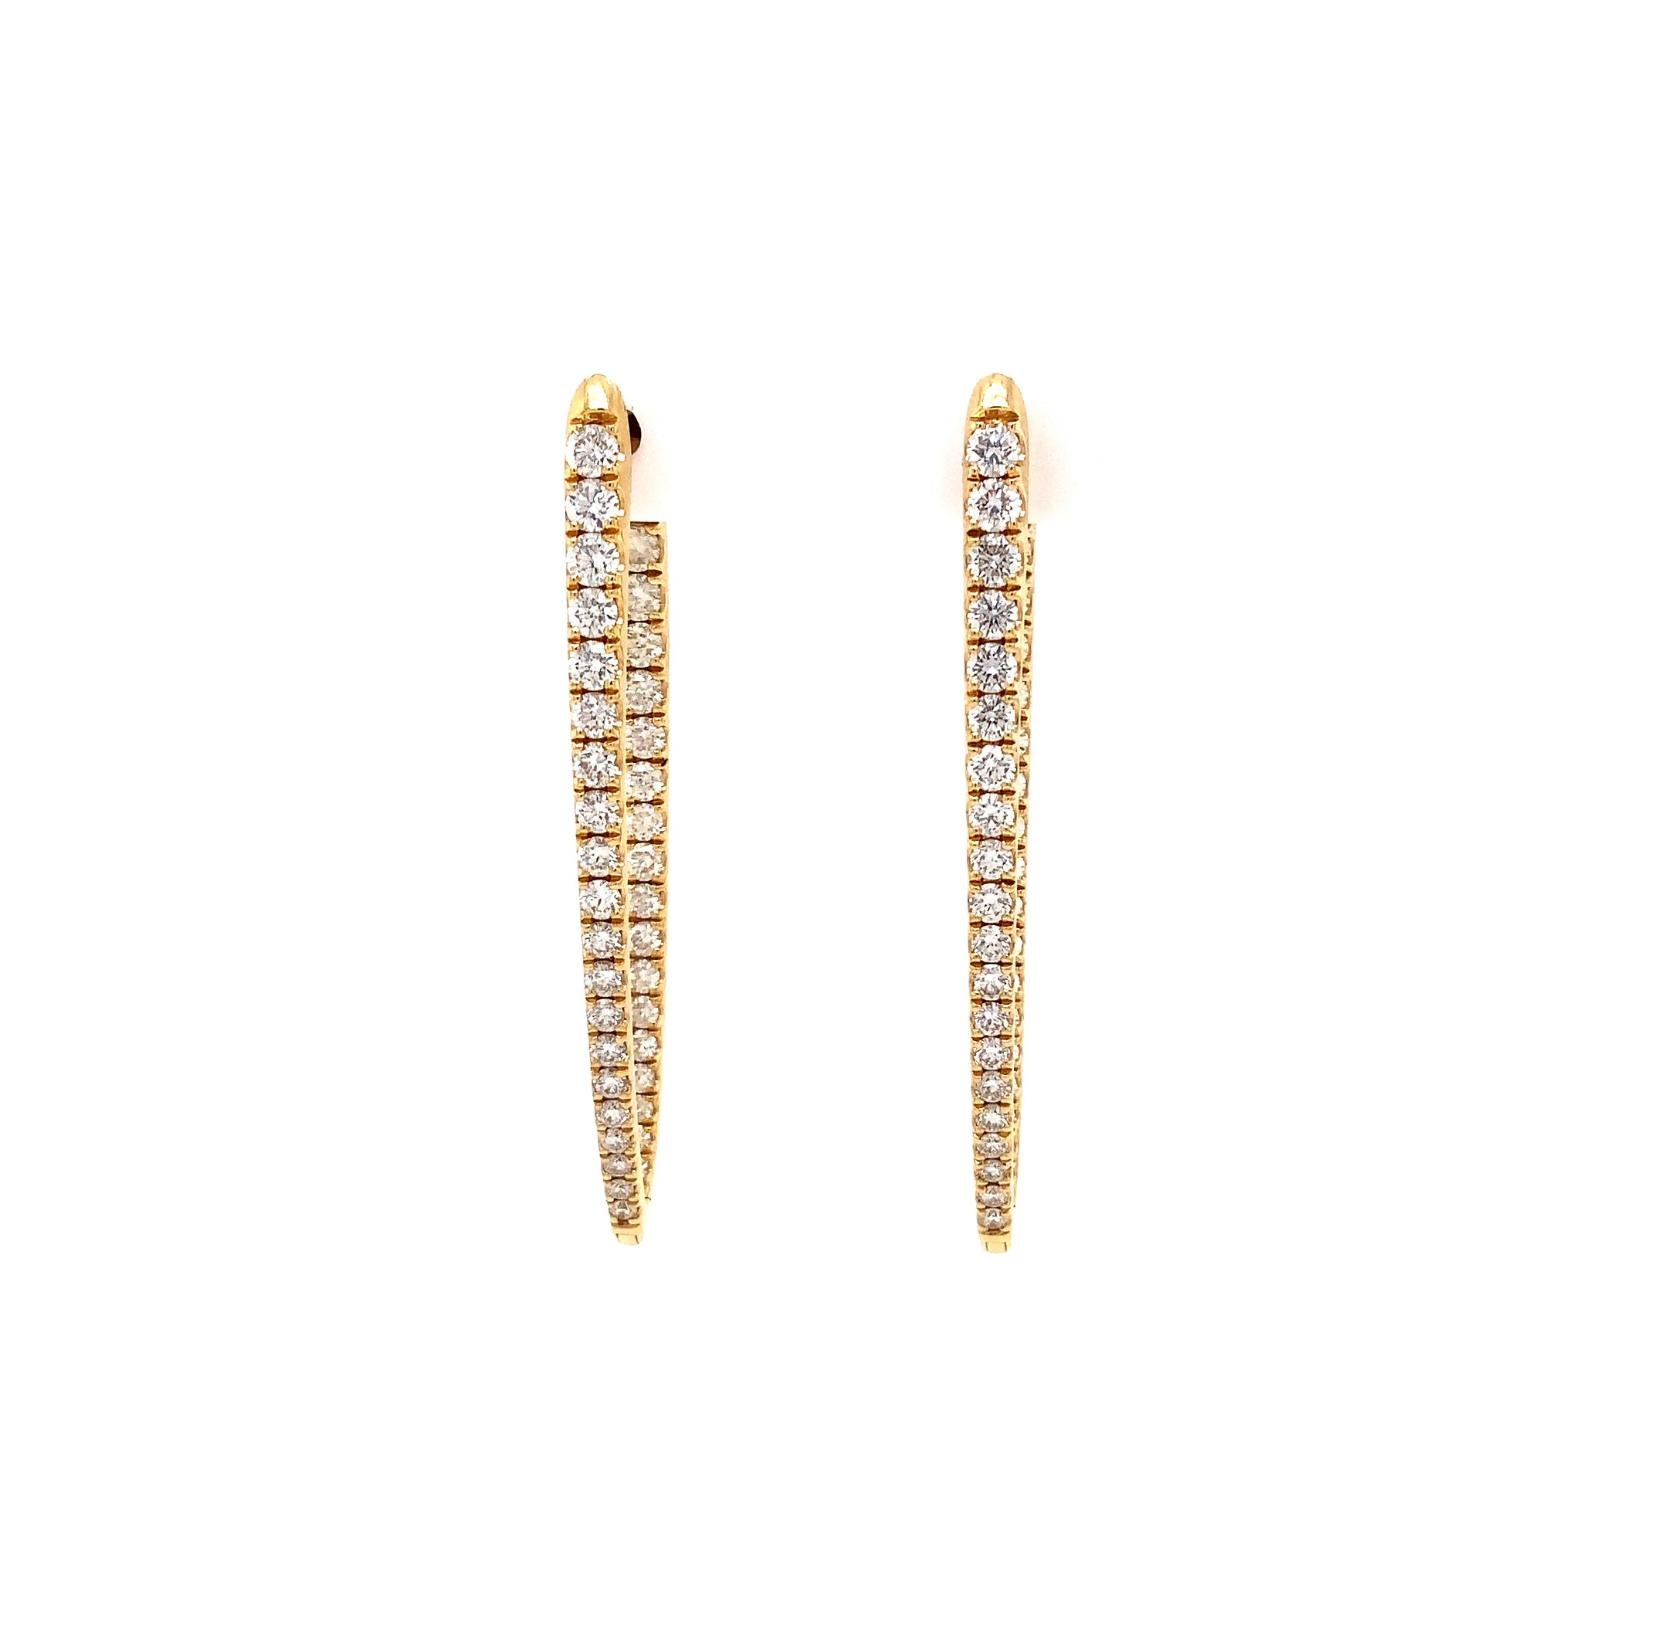 Modern Memoire 18k Yellow Gold Imperial Hoops 74 Diamonds Equals 1.67ctw For Sale